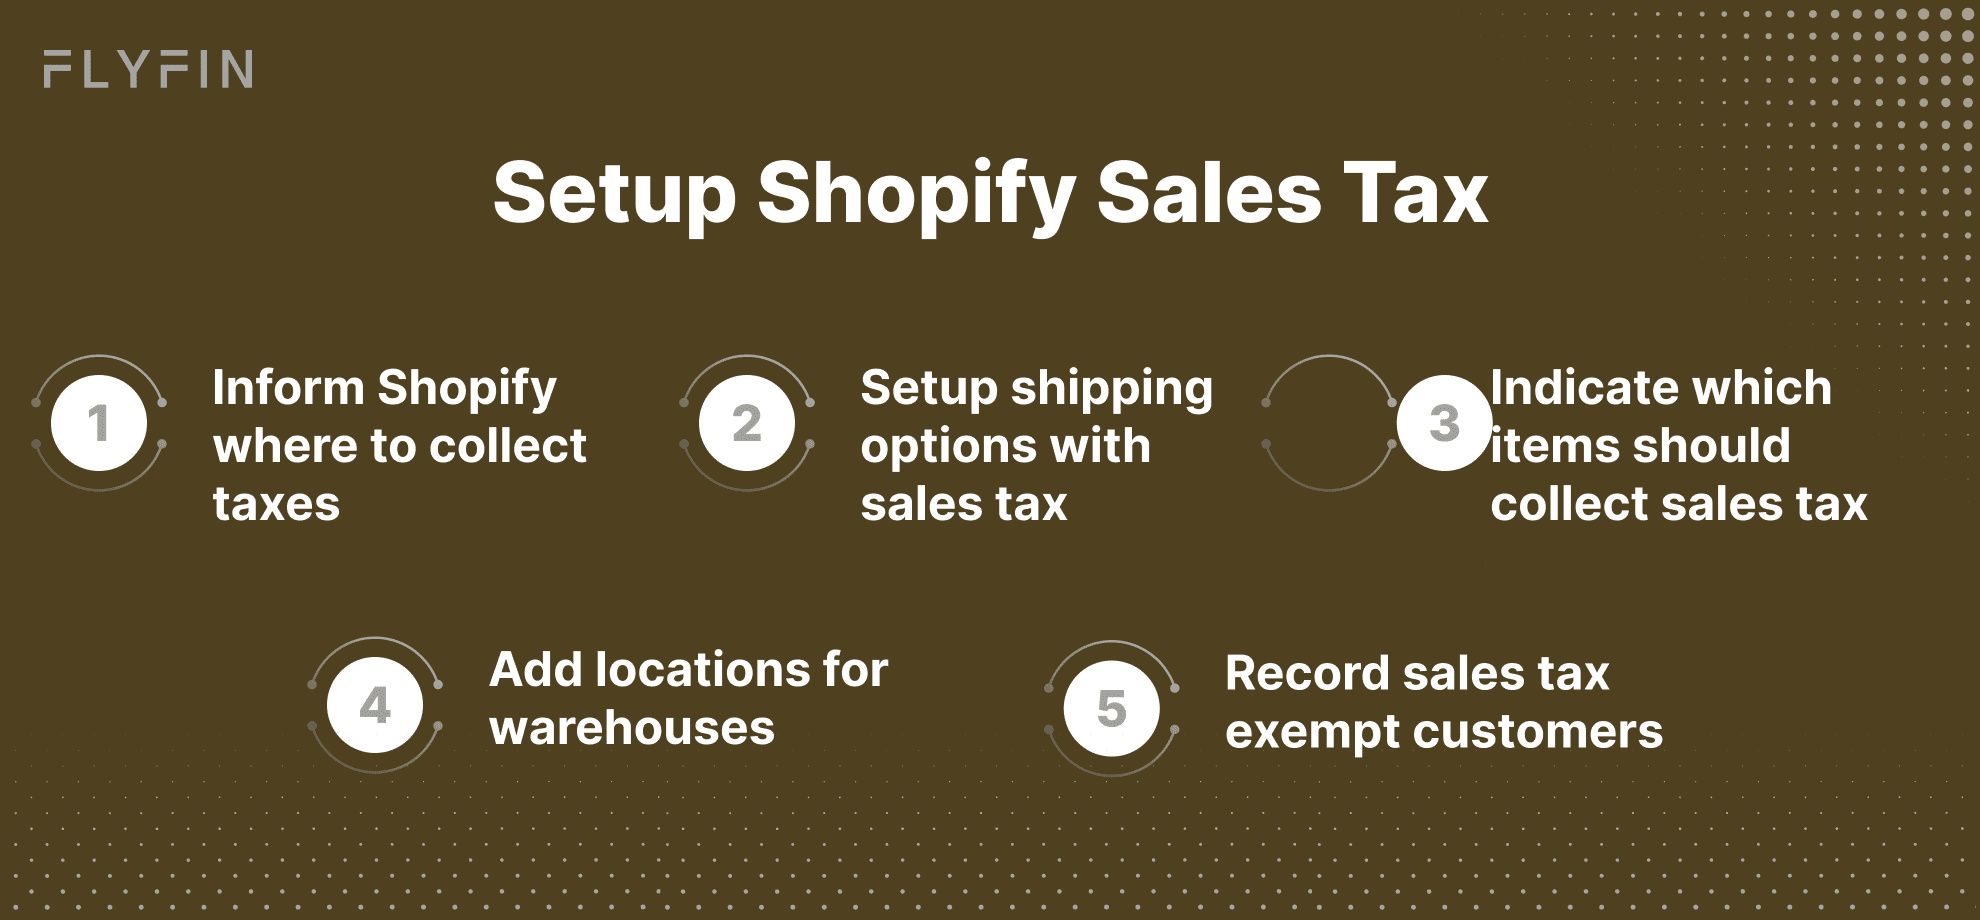 Does Shopify collect sales tax?